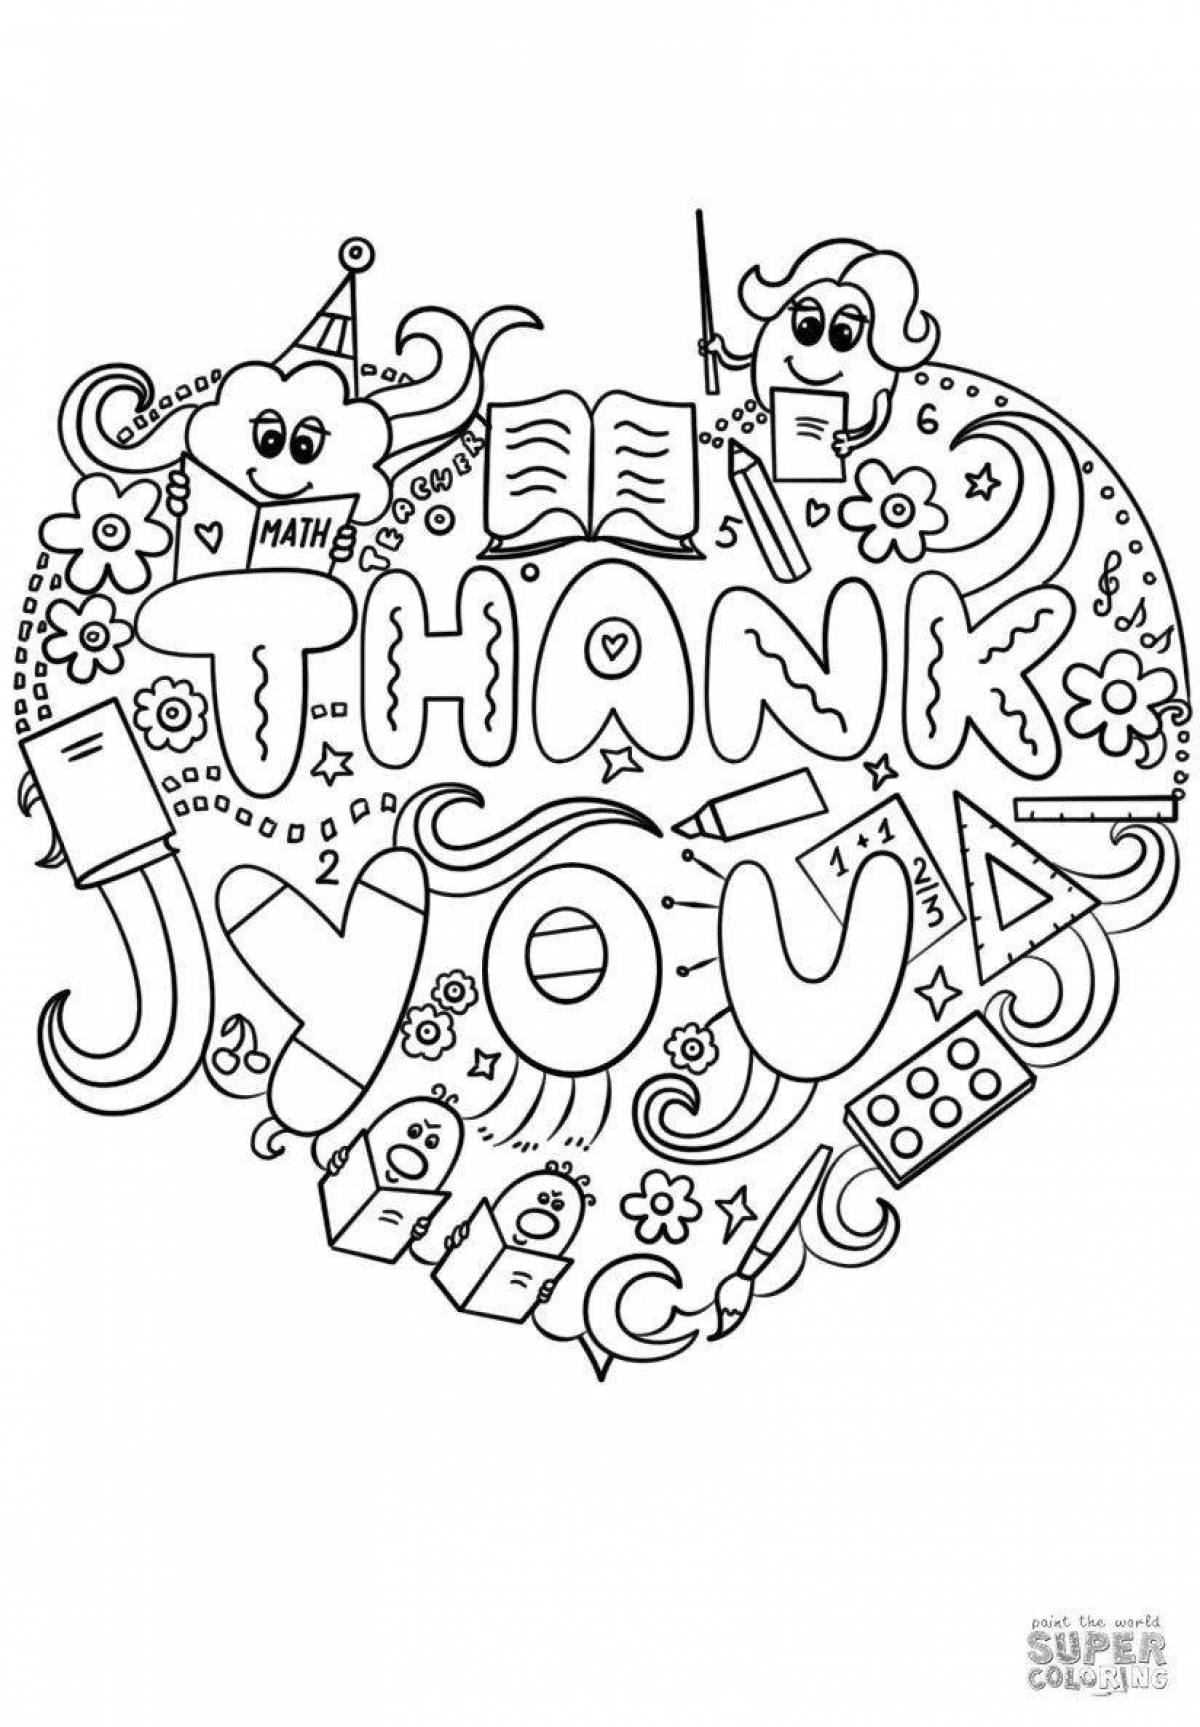 Adorable thank you coloring page